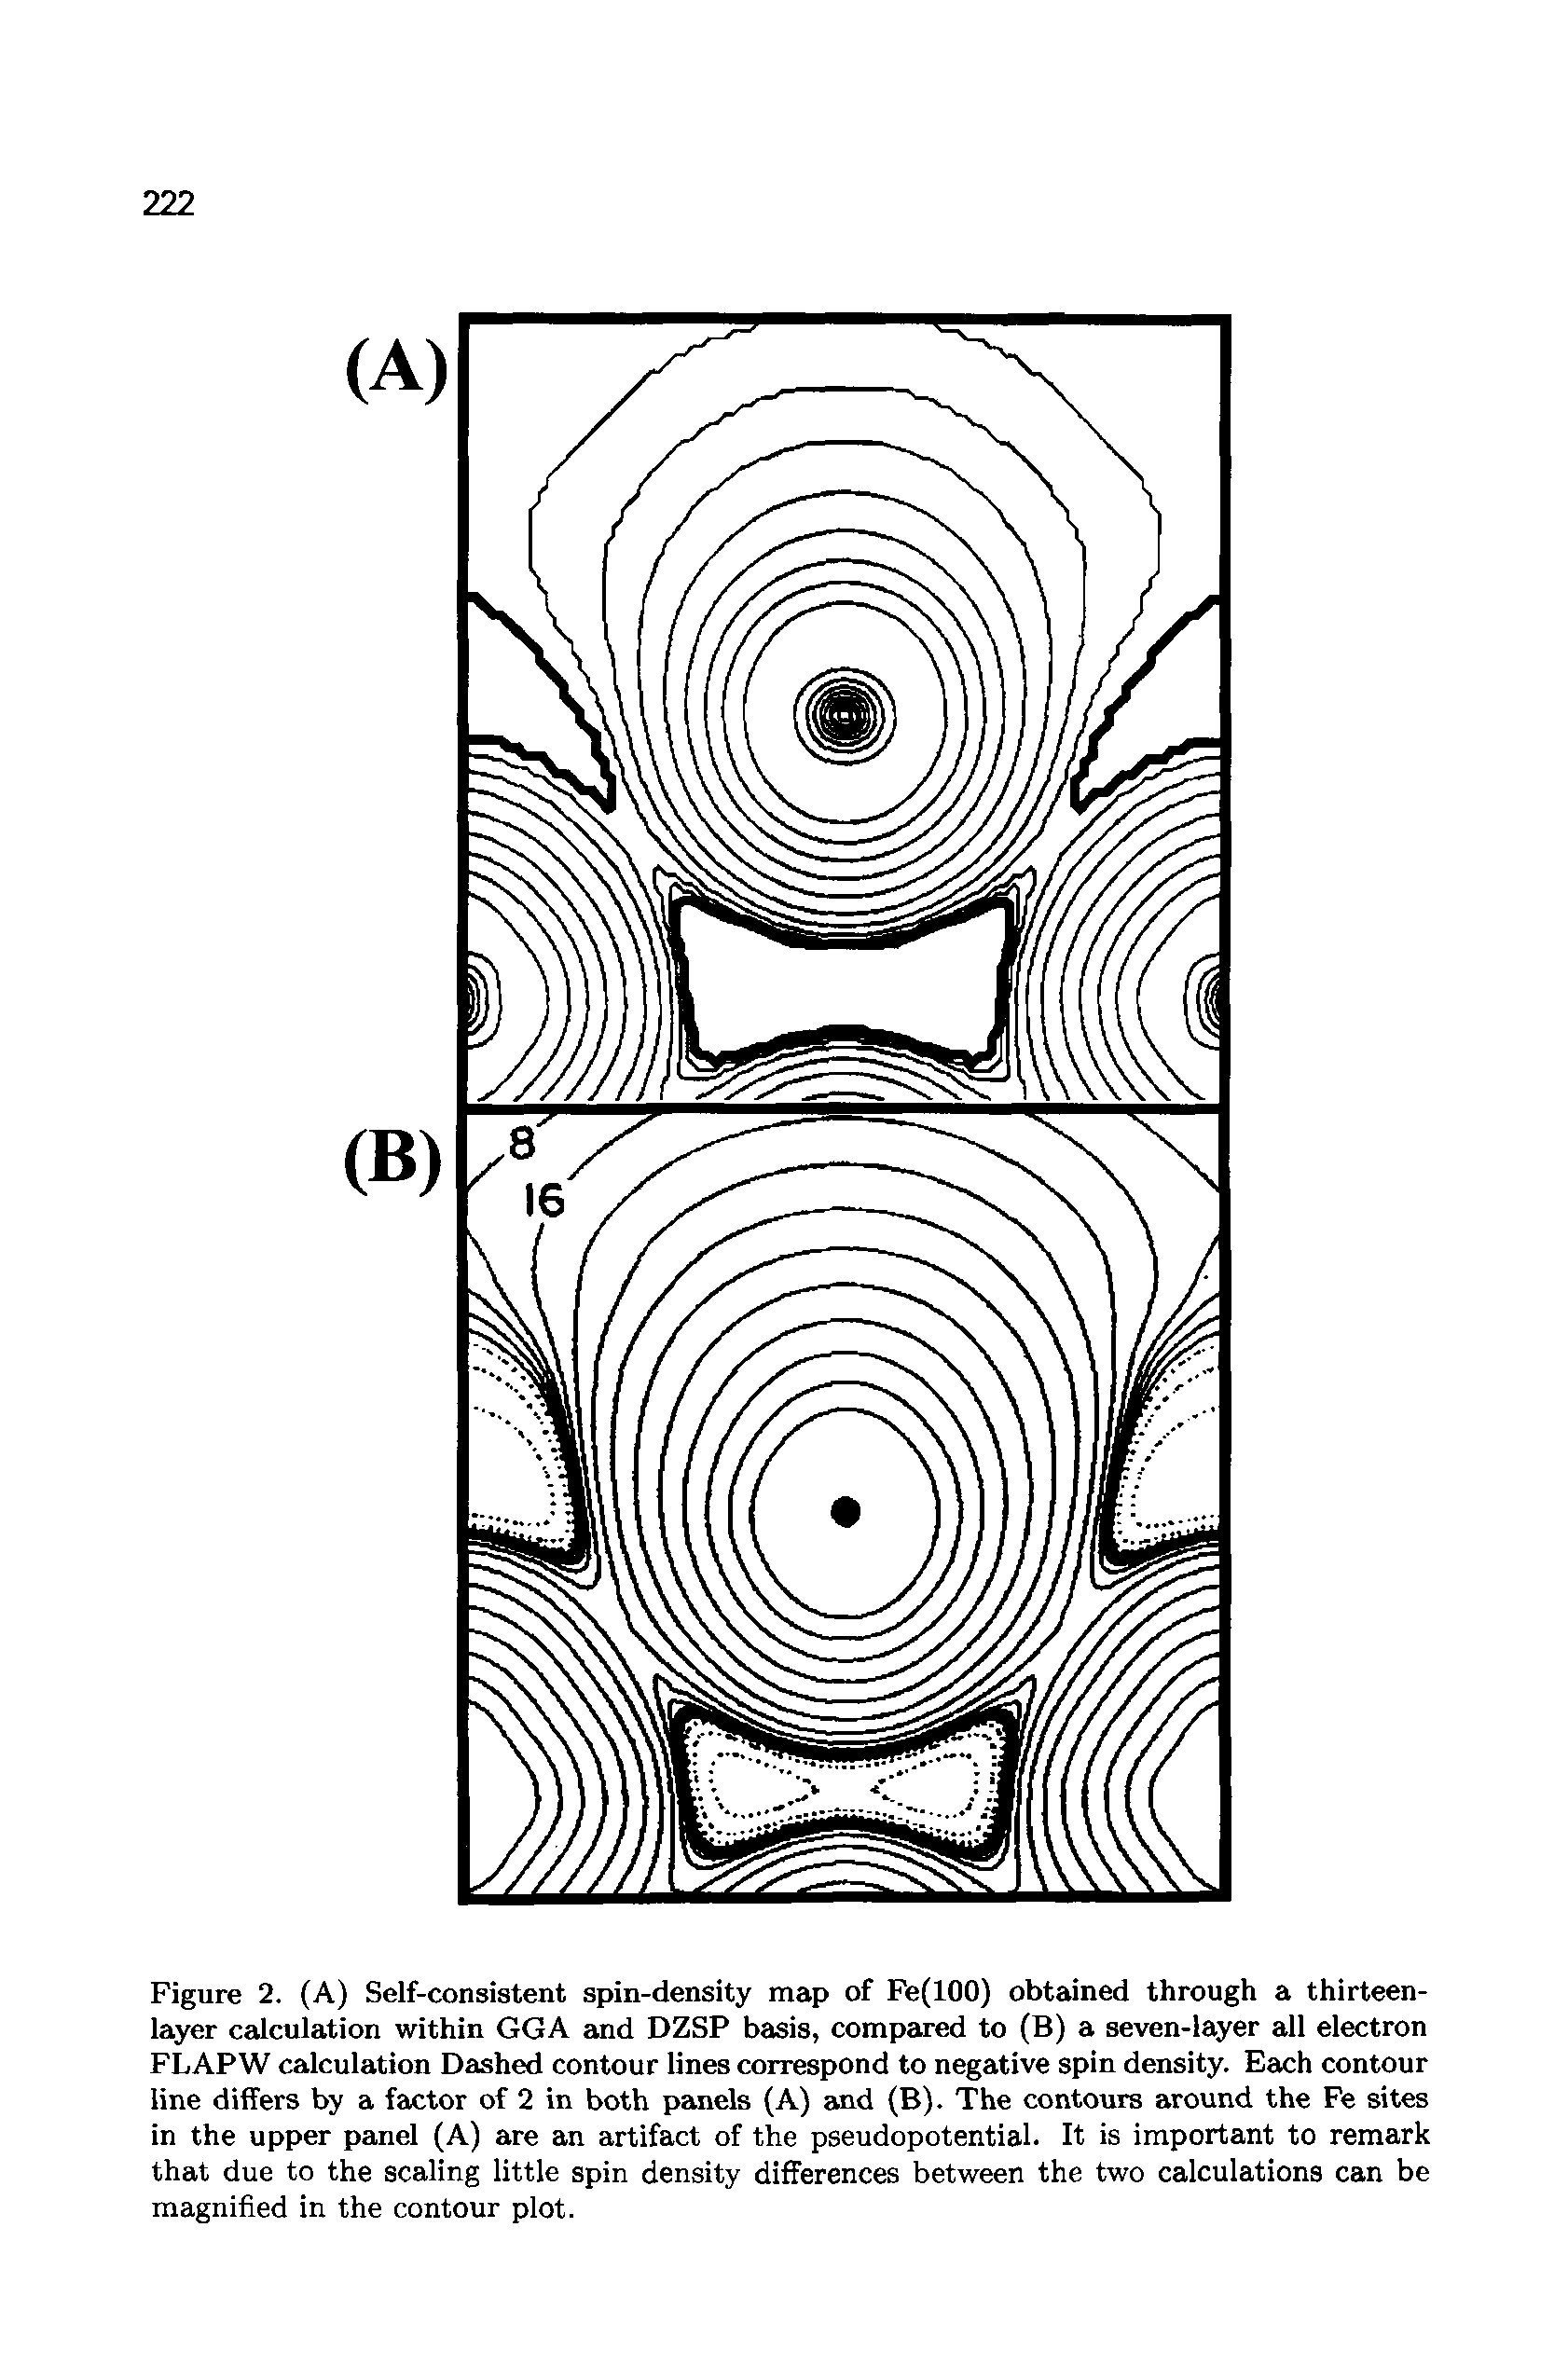 Figure 2. (A) Self-consistent spin-density map of Fe(lOO) obtained through a thirteen-layer calculation within GGA and DZSP basis, compared to (B) a seven-layer all electron FLAPW calculation Dashed contour lines correspond to negative spin density. Each contour line differs by a factor of 2 in both panels (A) and (B). The contours around the Fe sites in the upper panel (A) are an artifact of the pseudopotential. It is important to remark that due to the scaling little spin density differences between the two calculations can be magnified in the contour plot.